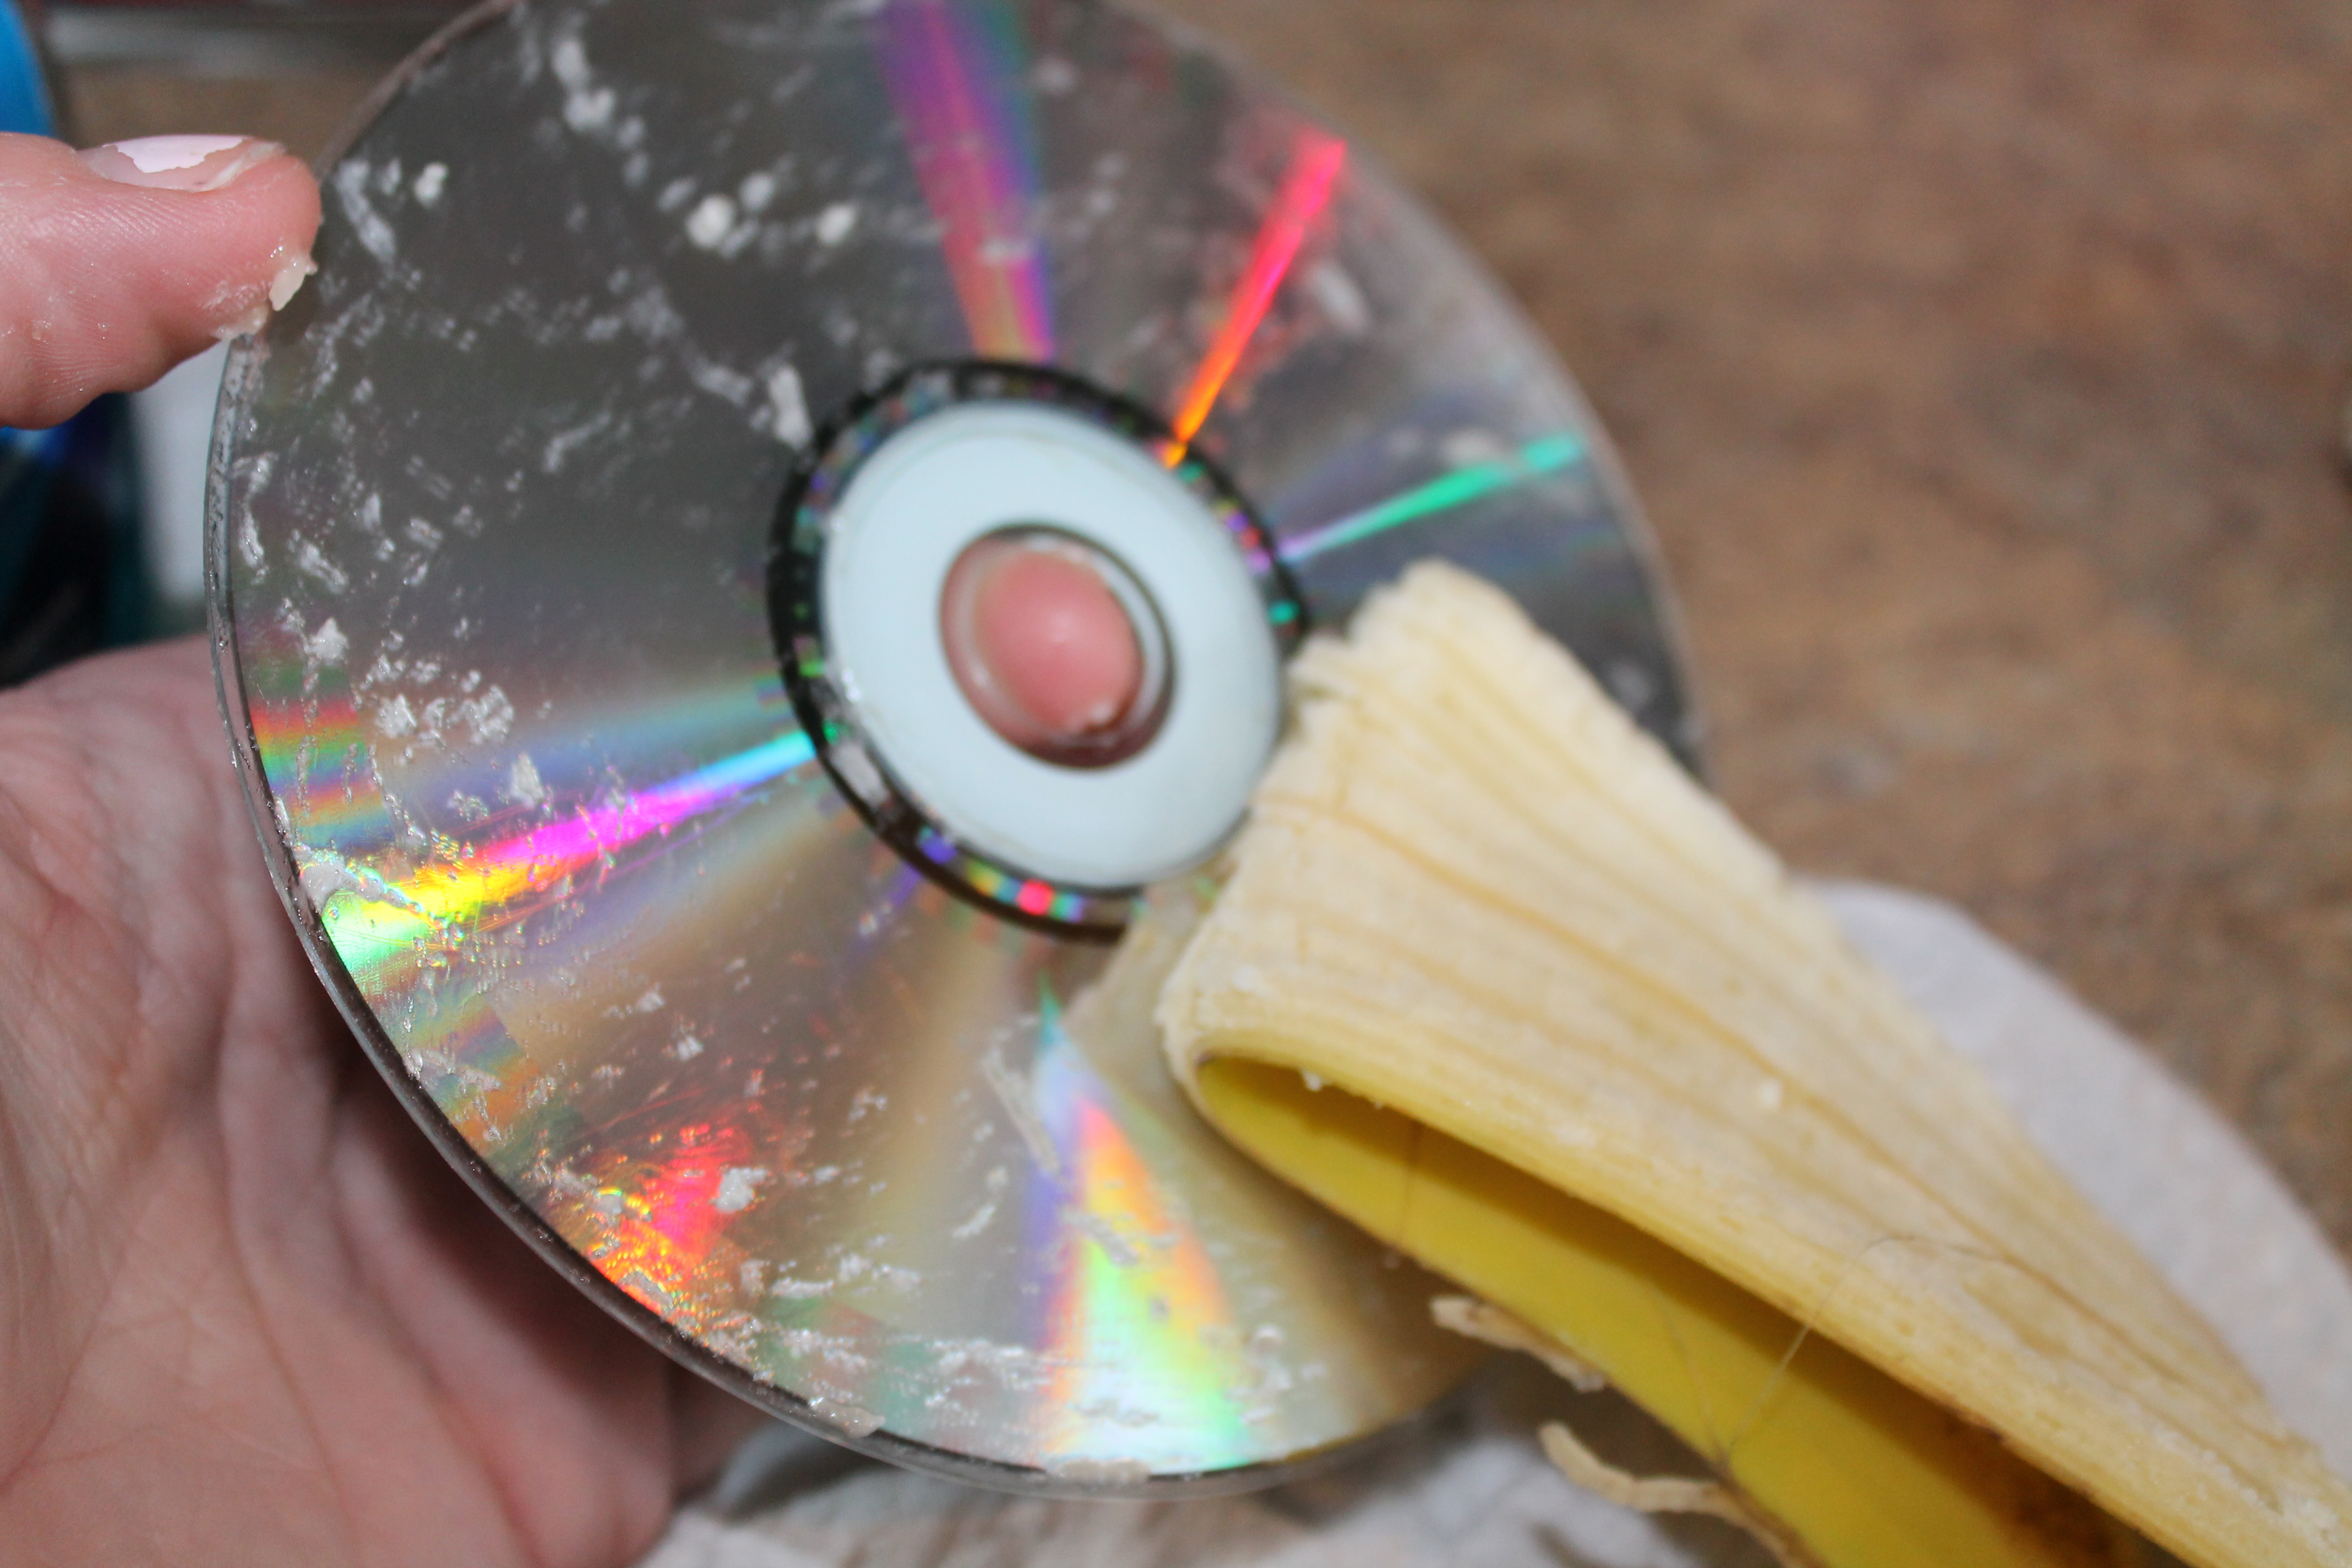 How to Fix a Scratched CD